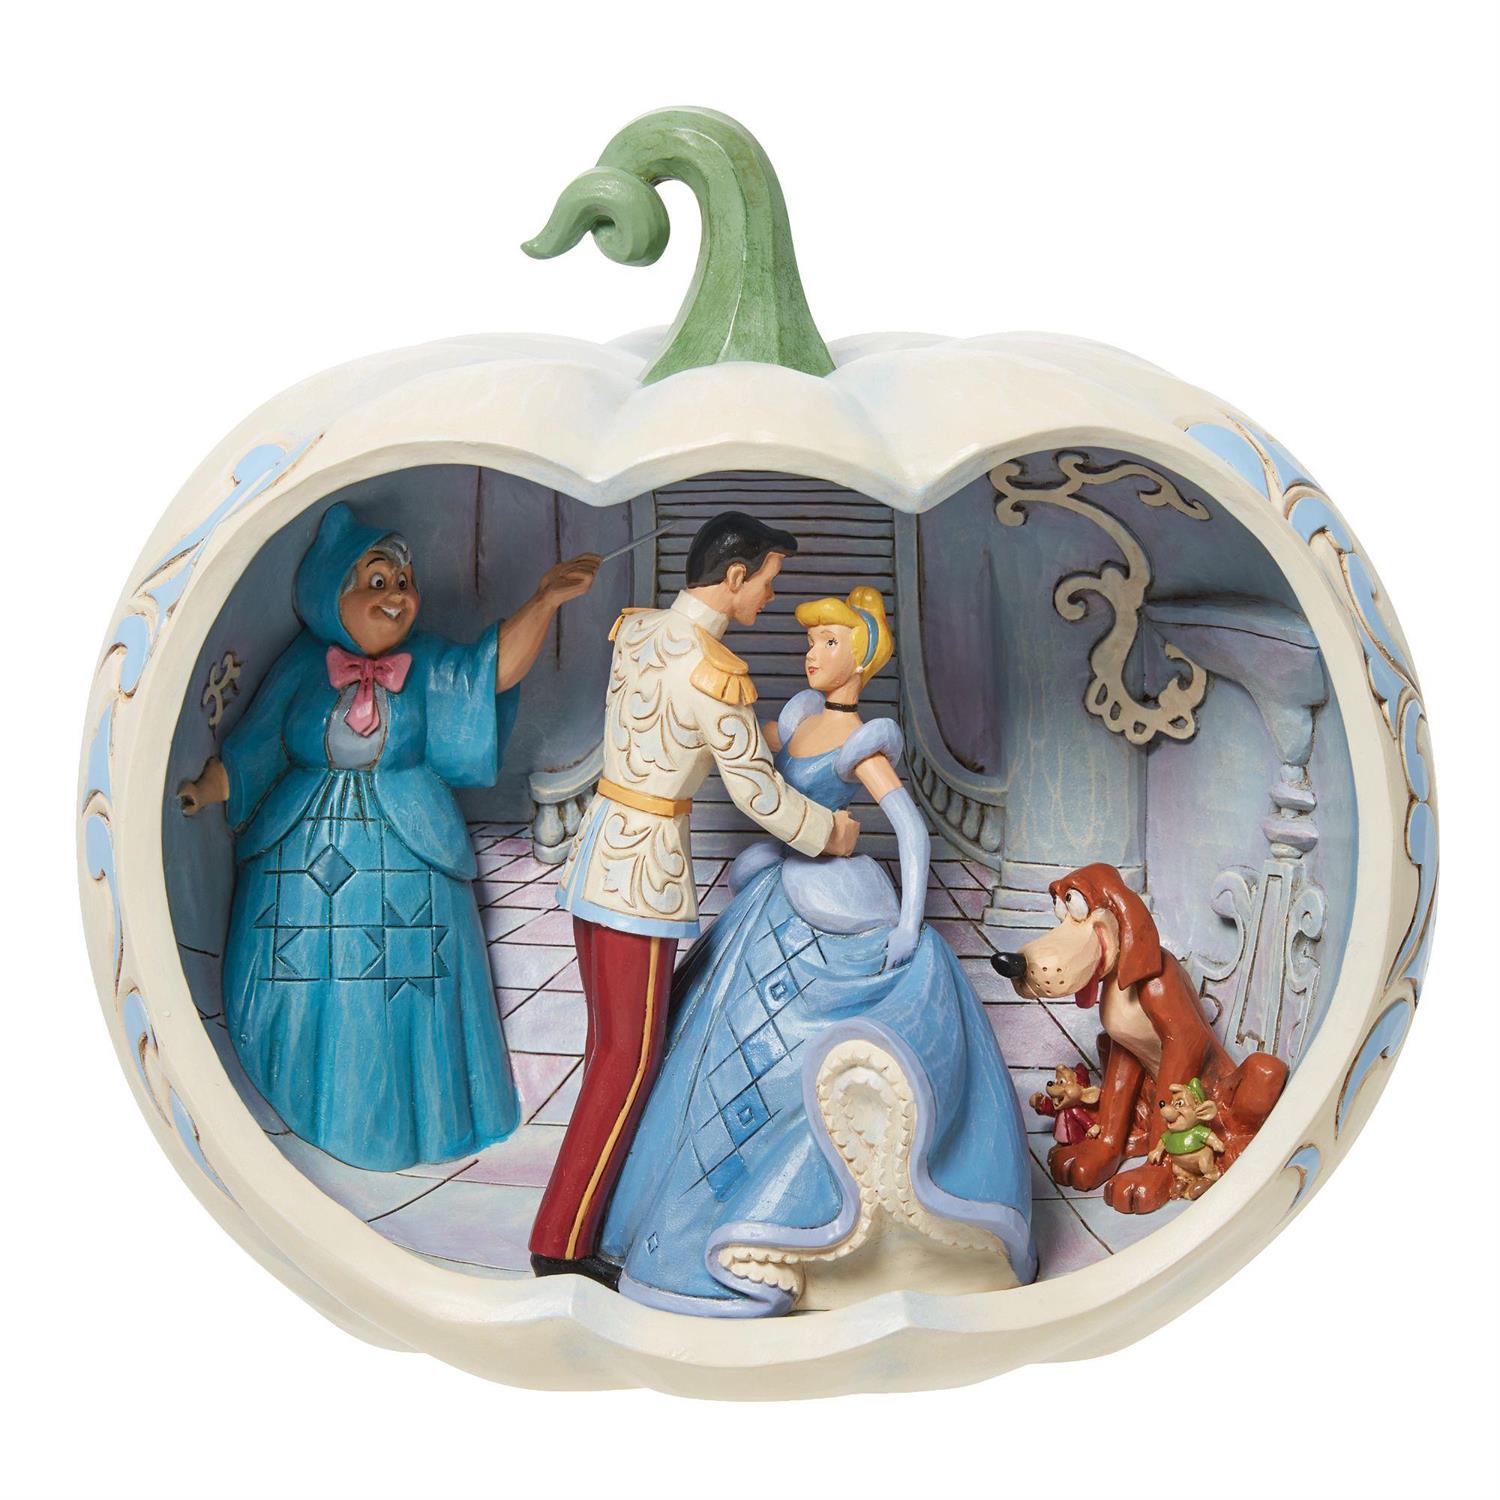 Cinderella dance with the Prince inside a carved pumpkin